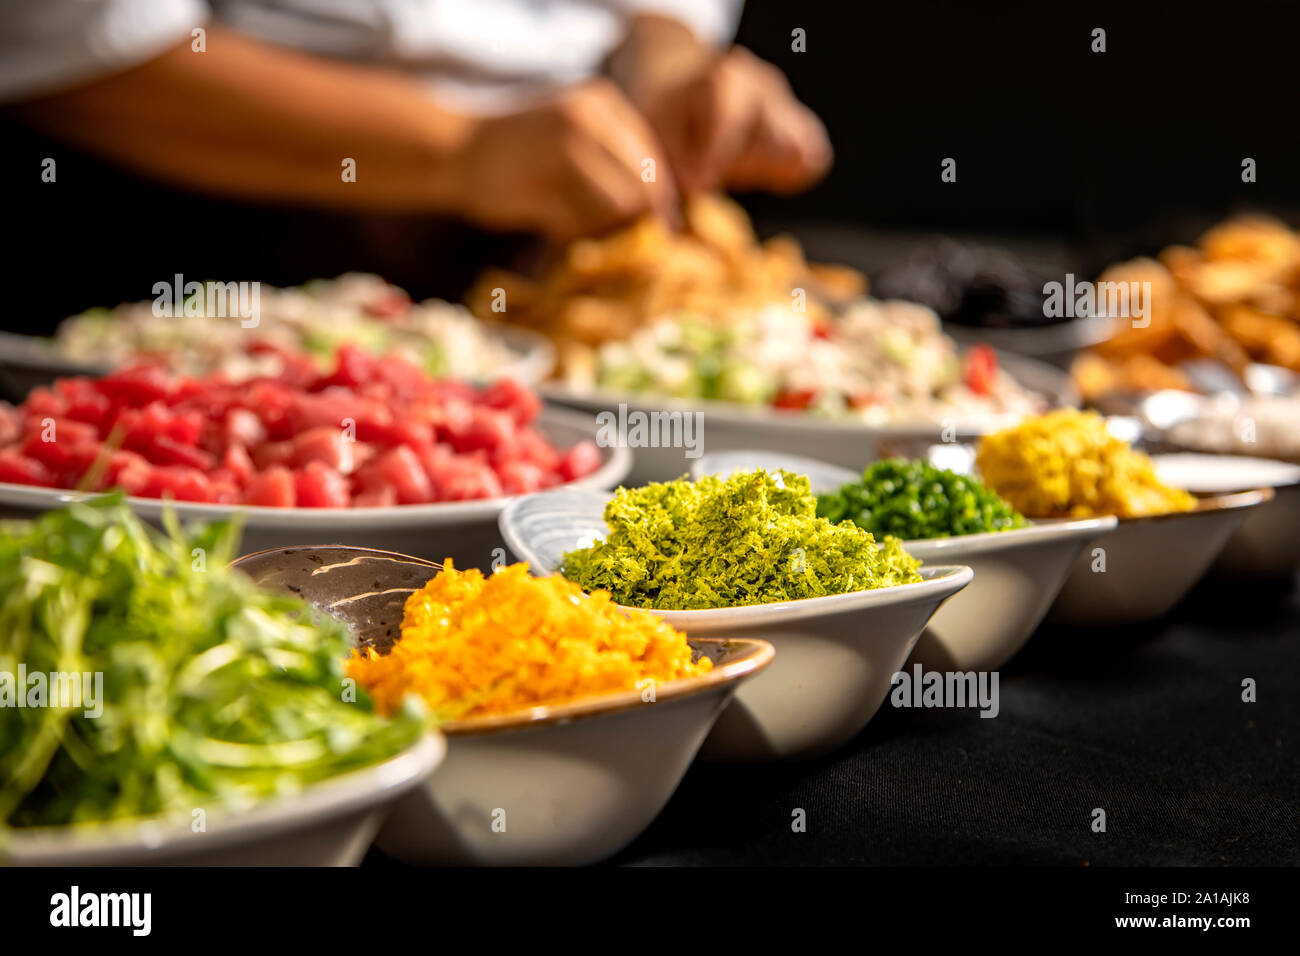 Spices in bowls with chef's hands working in background Stock Photo